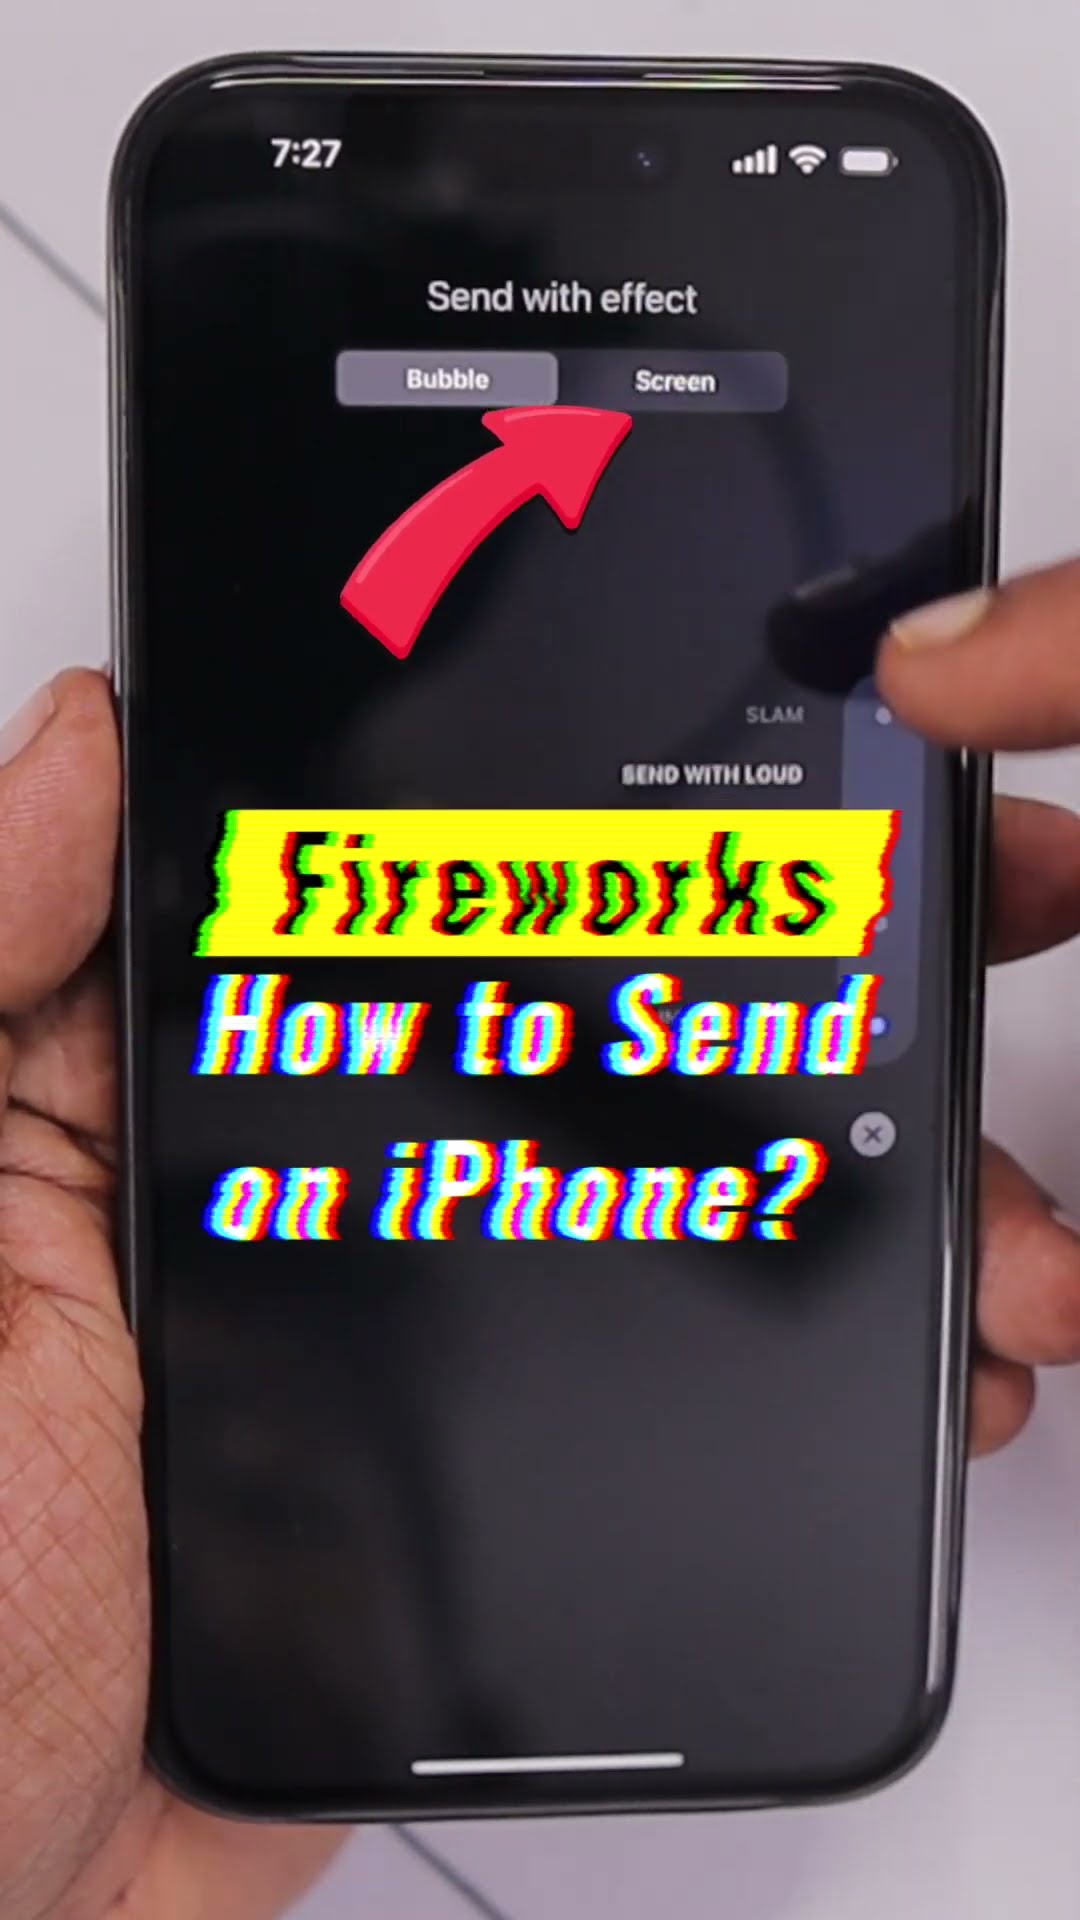 How to send a FIREWORKS text message on iPhone?